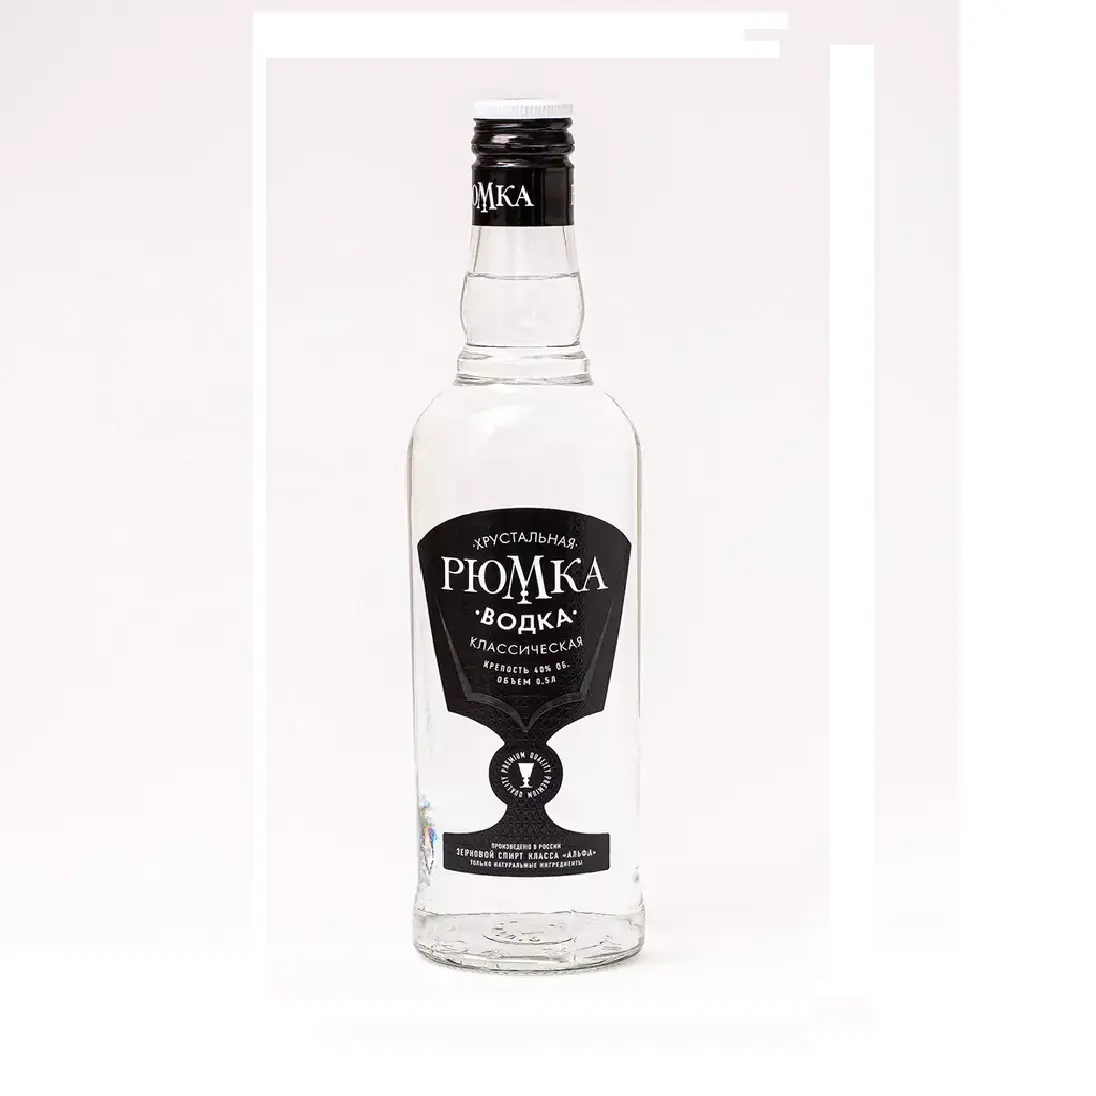 100 % Premium quality 500 ml 40% Classic strong and clean taste 'Crystal wineglass' strong grain vodka